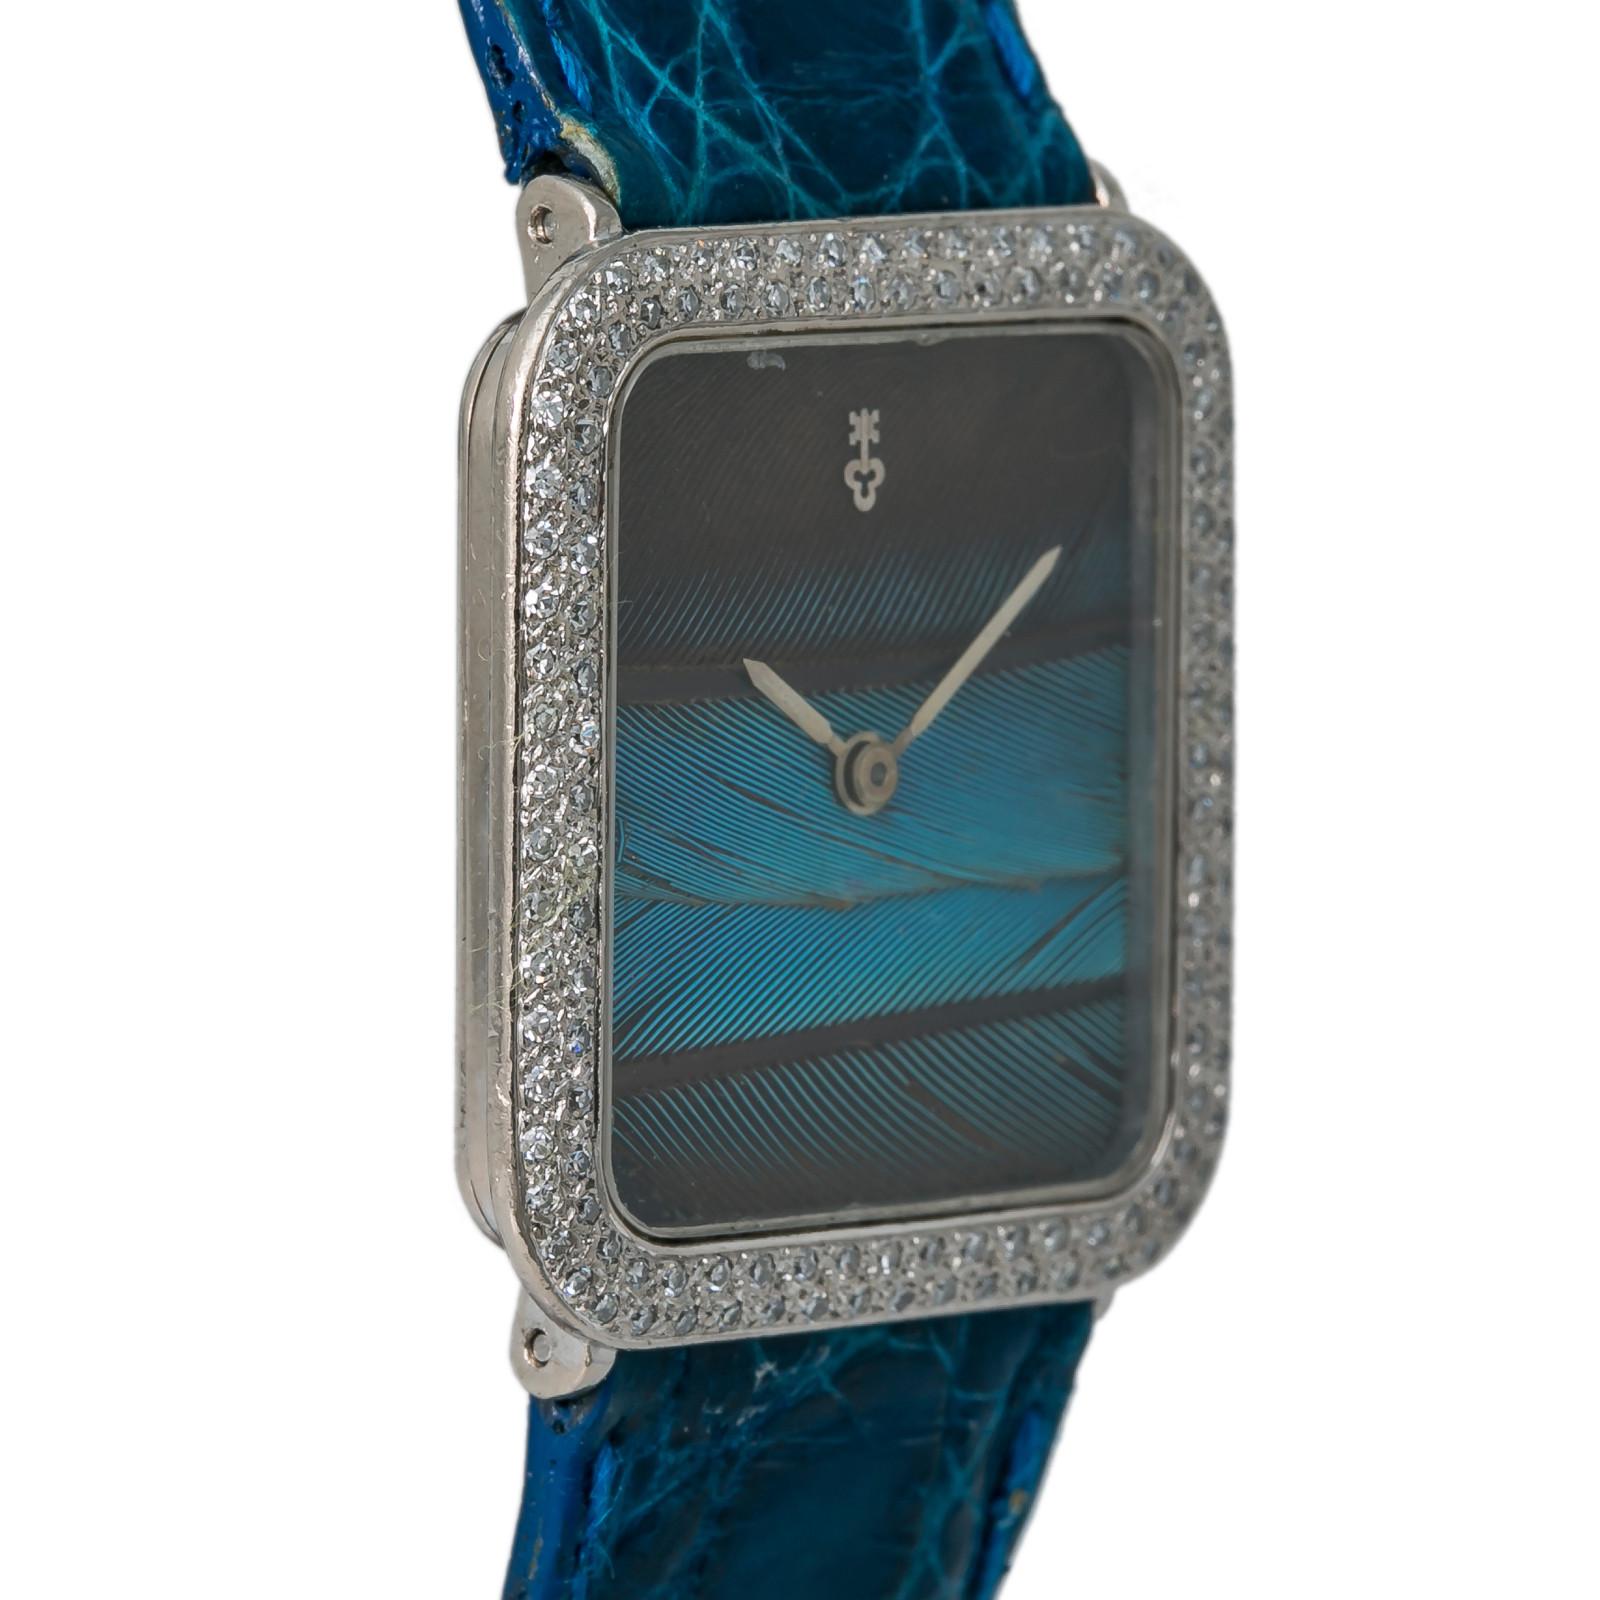 Corum Peacock 27536, Blue Dial, Certified and Warranty In Good Condition For Sale In Miami, FL